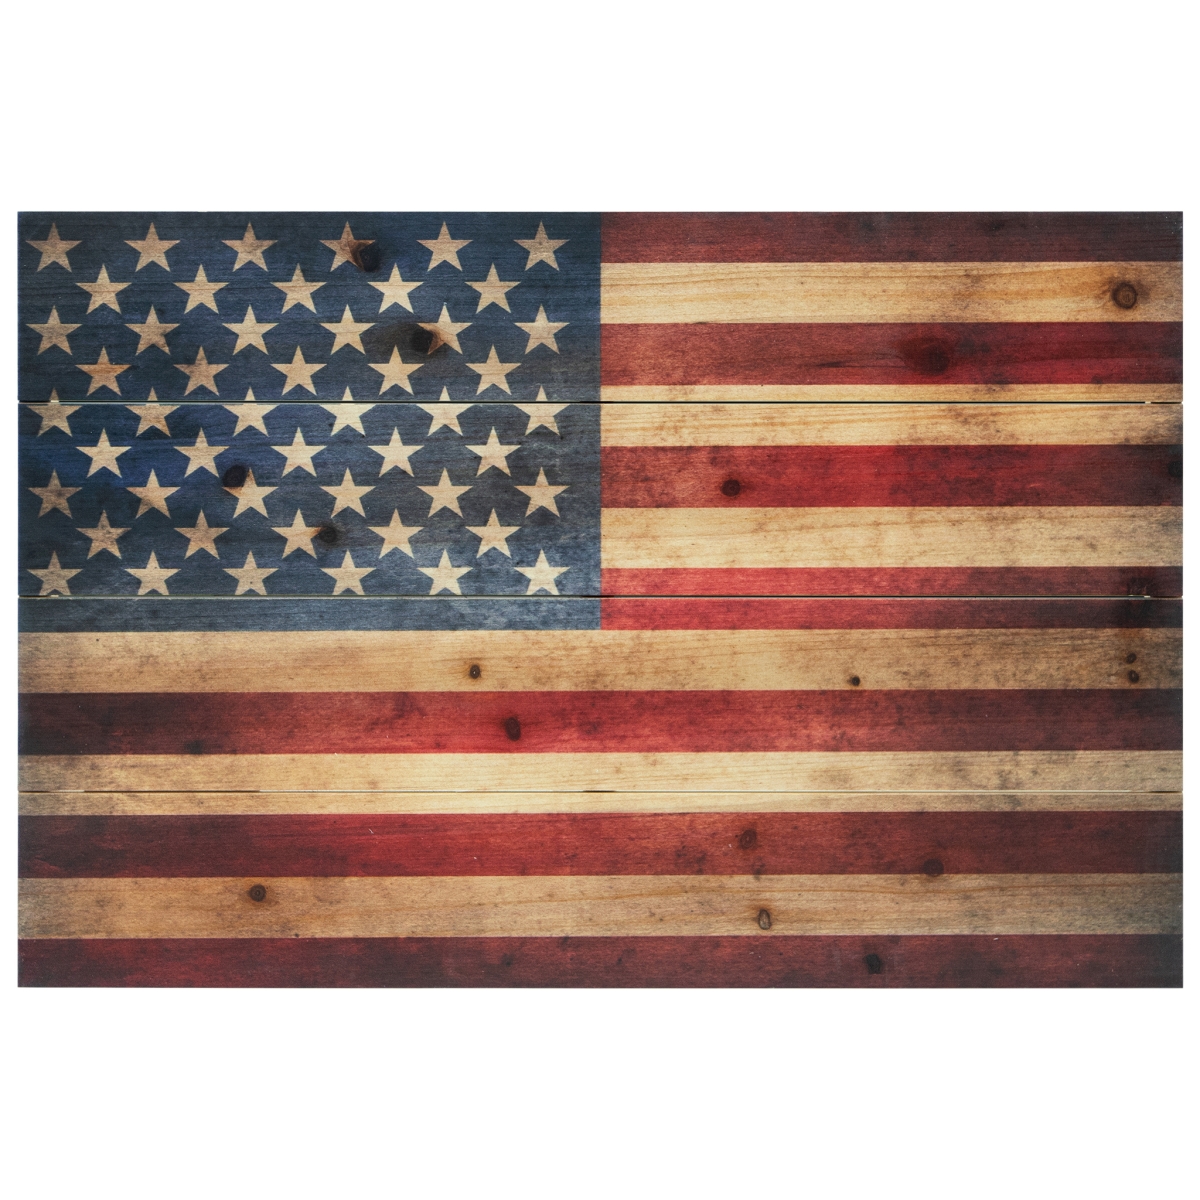 Picture of Empire Art Direct ADL-EA2000-1624 16 x 24 in. American Flag Digital Print on Solid Wood Wall Art